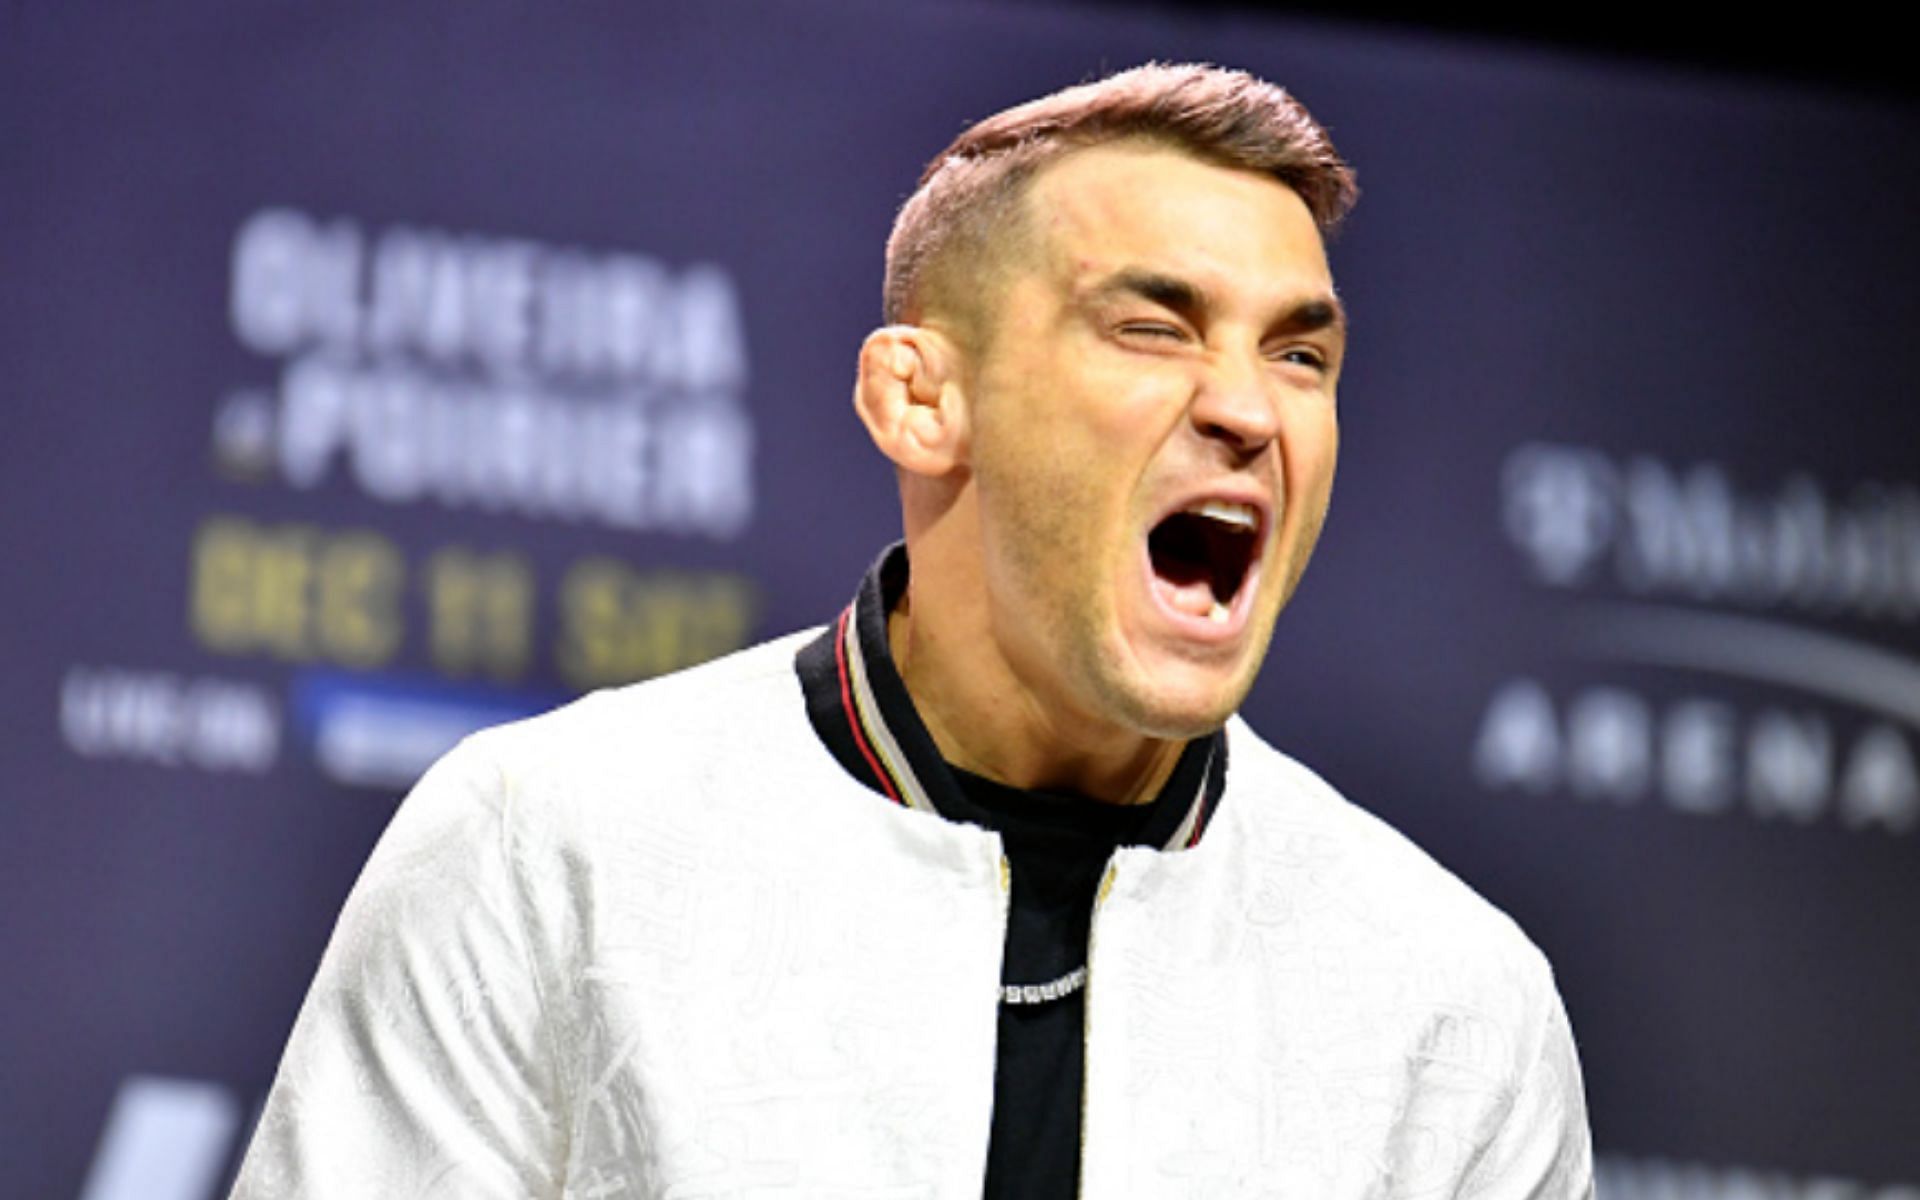 Dustin Poirier is considered to be the top MMA lightweights in the world